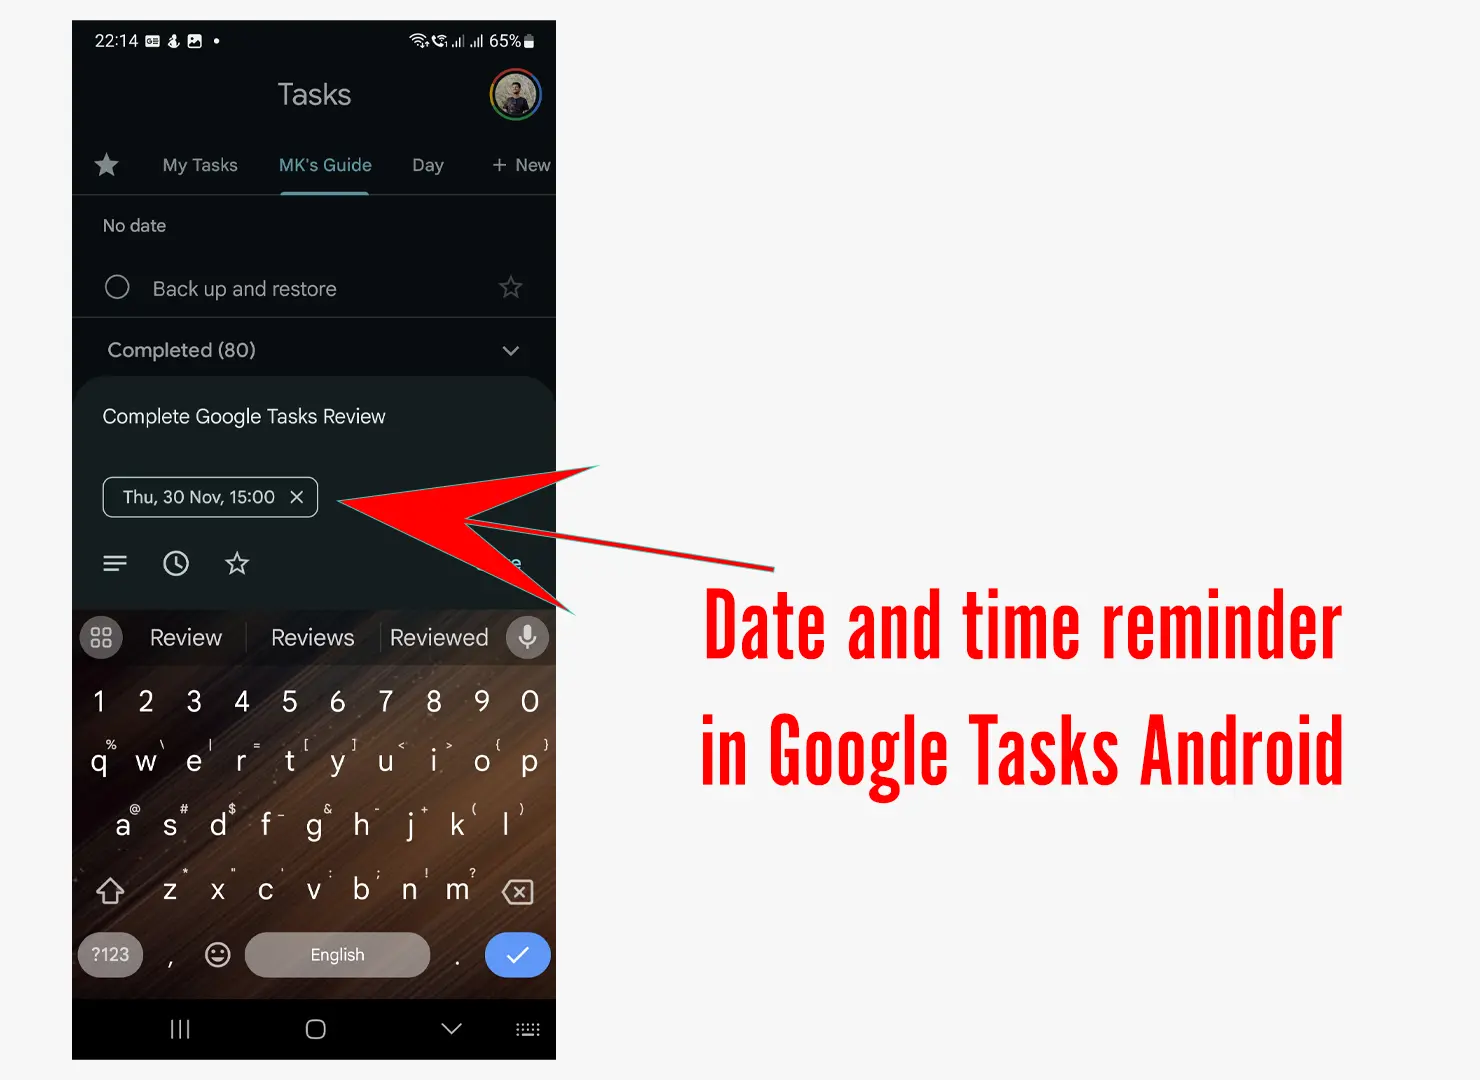 Date and time reminder in Google Tasks Android